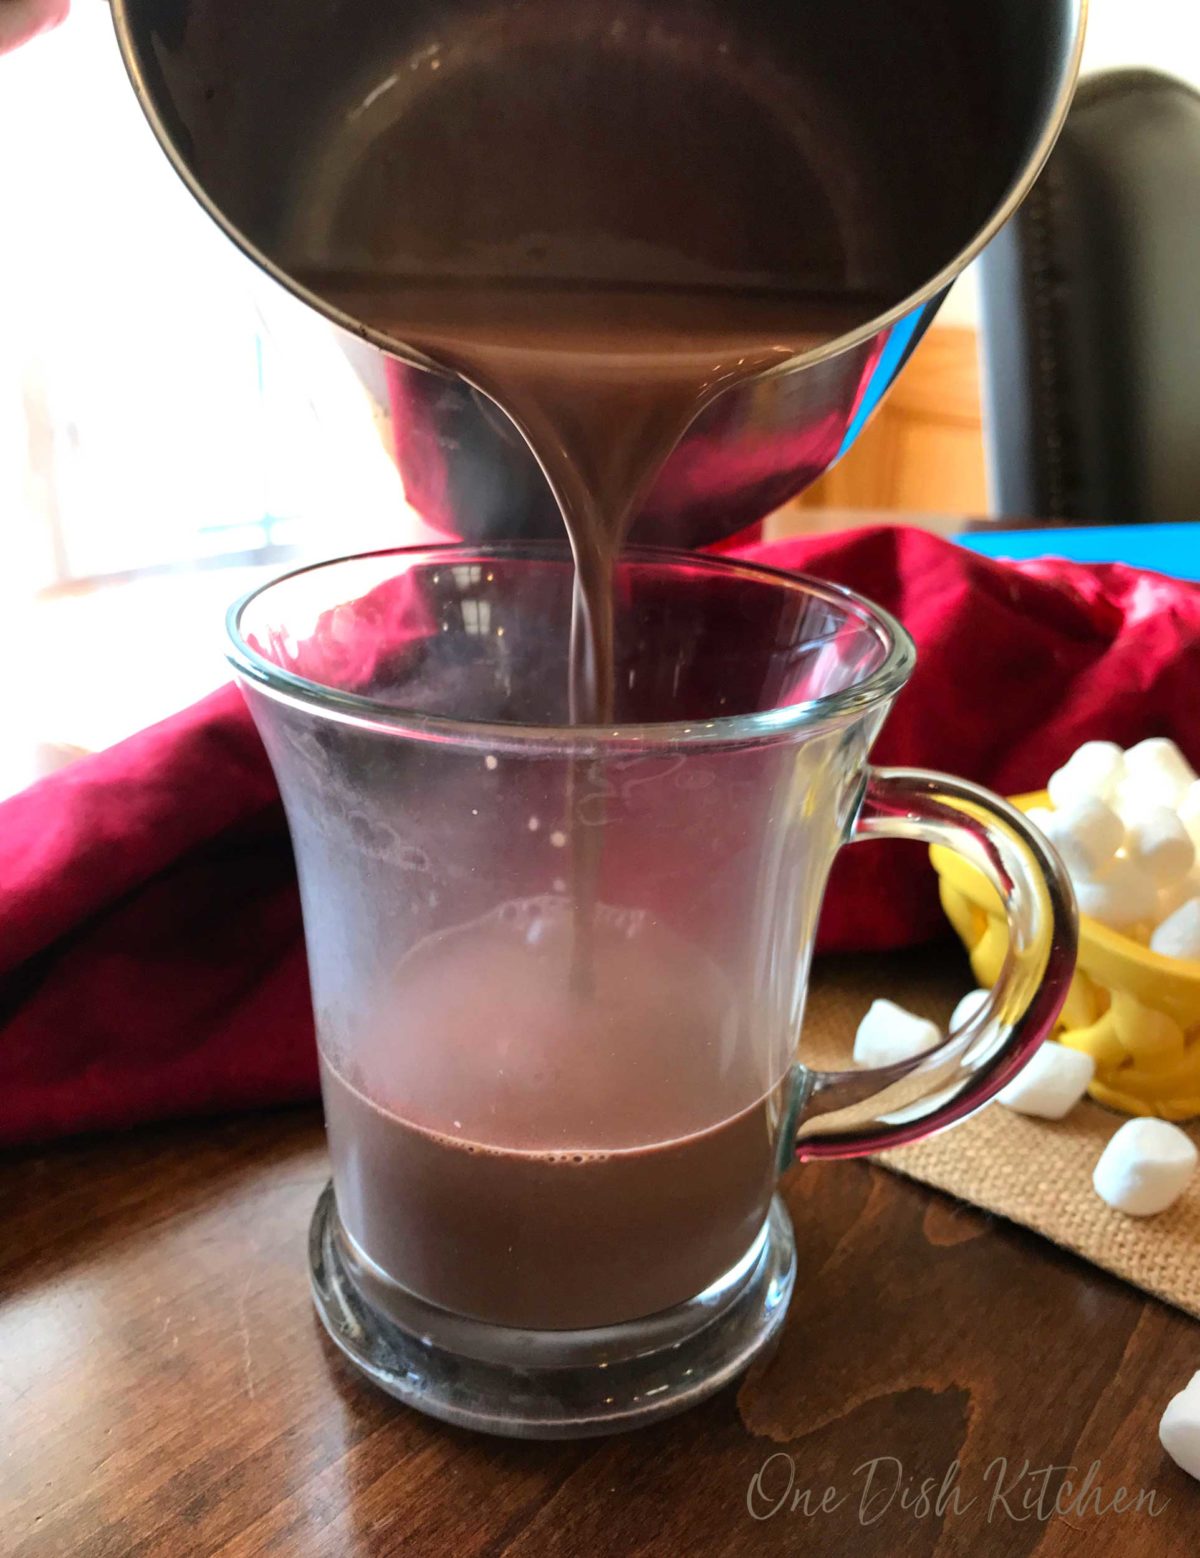 pouring hot chocolate from a saucepan into a mug on a kitchen table.